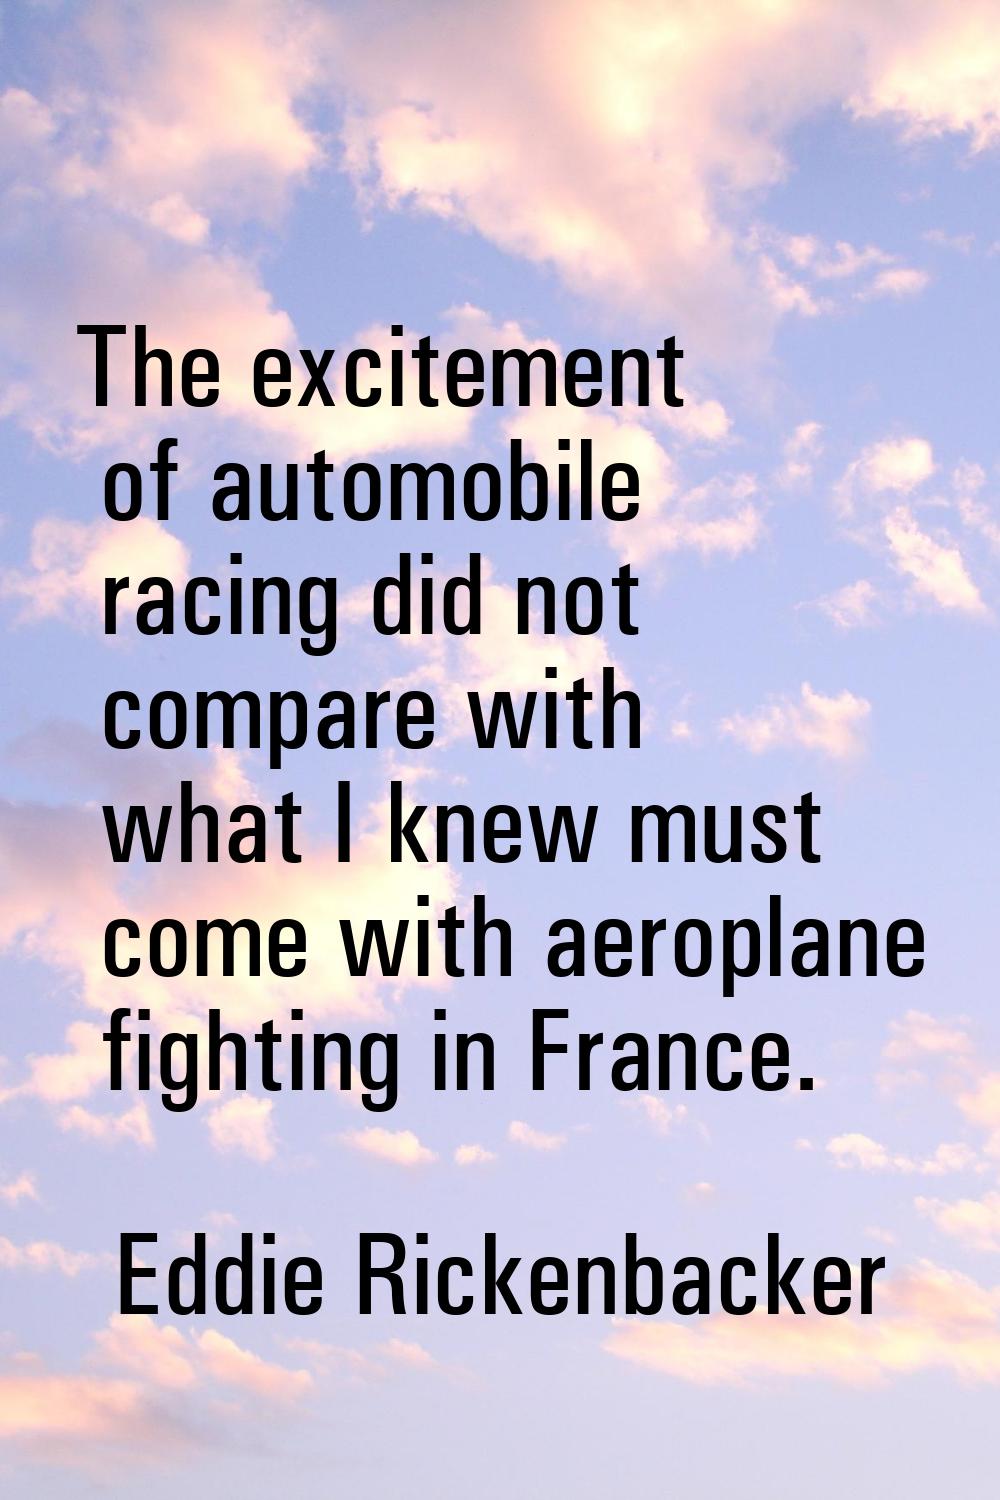 The excitement of automobile racing did not compare with what I knew must come with aeroplane fight